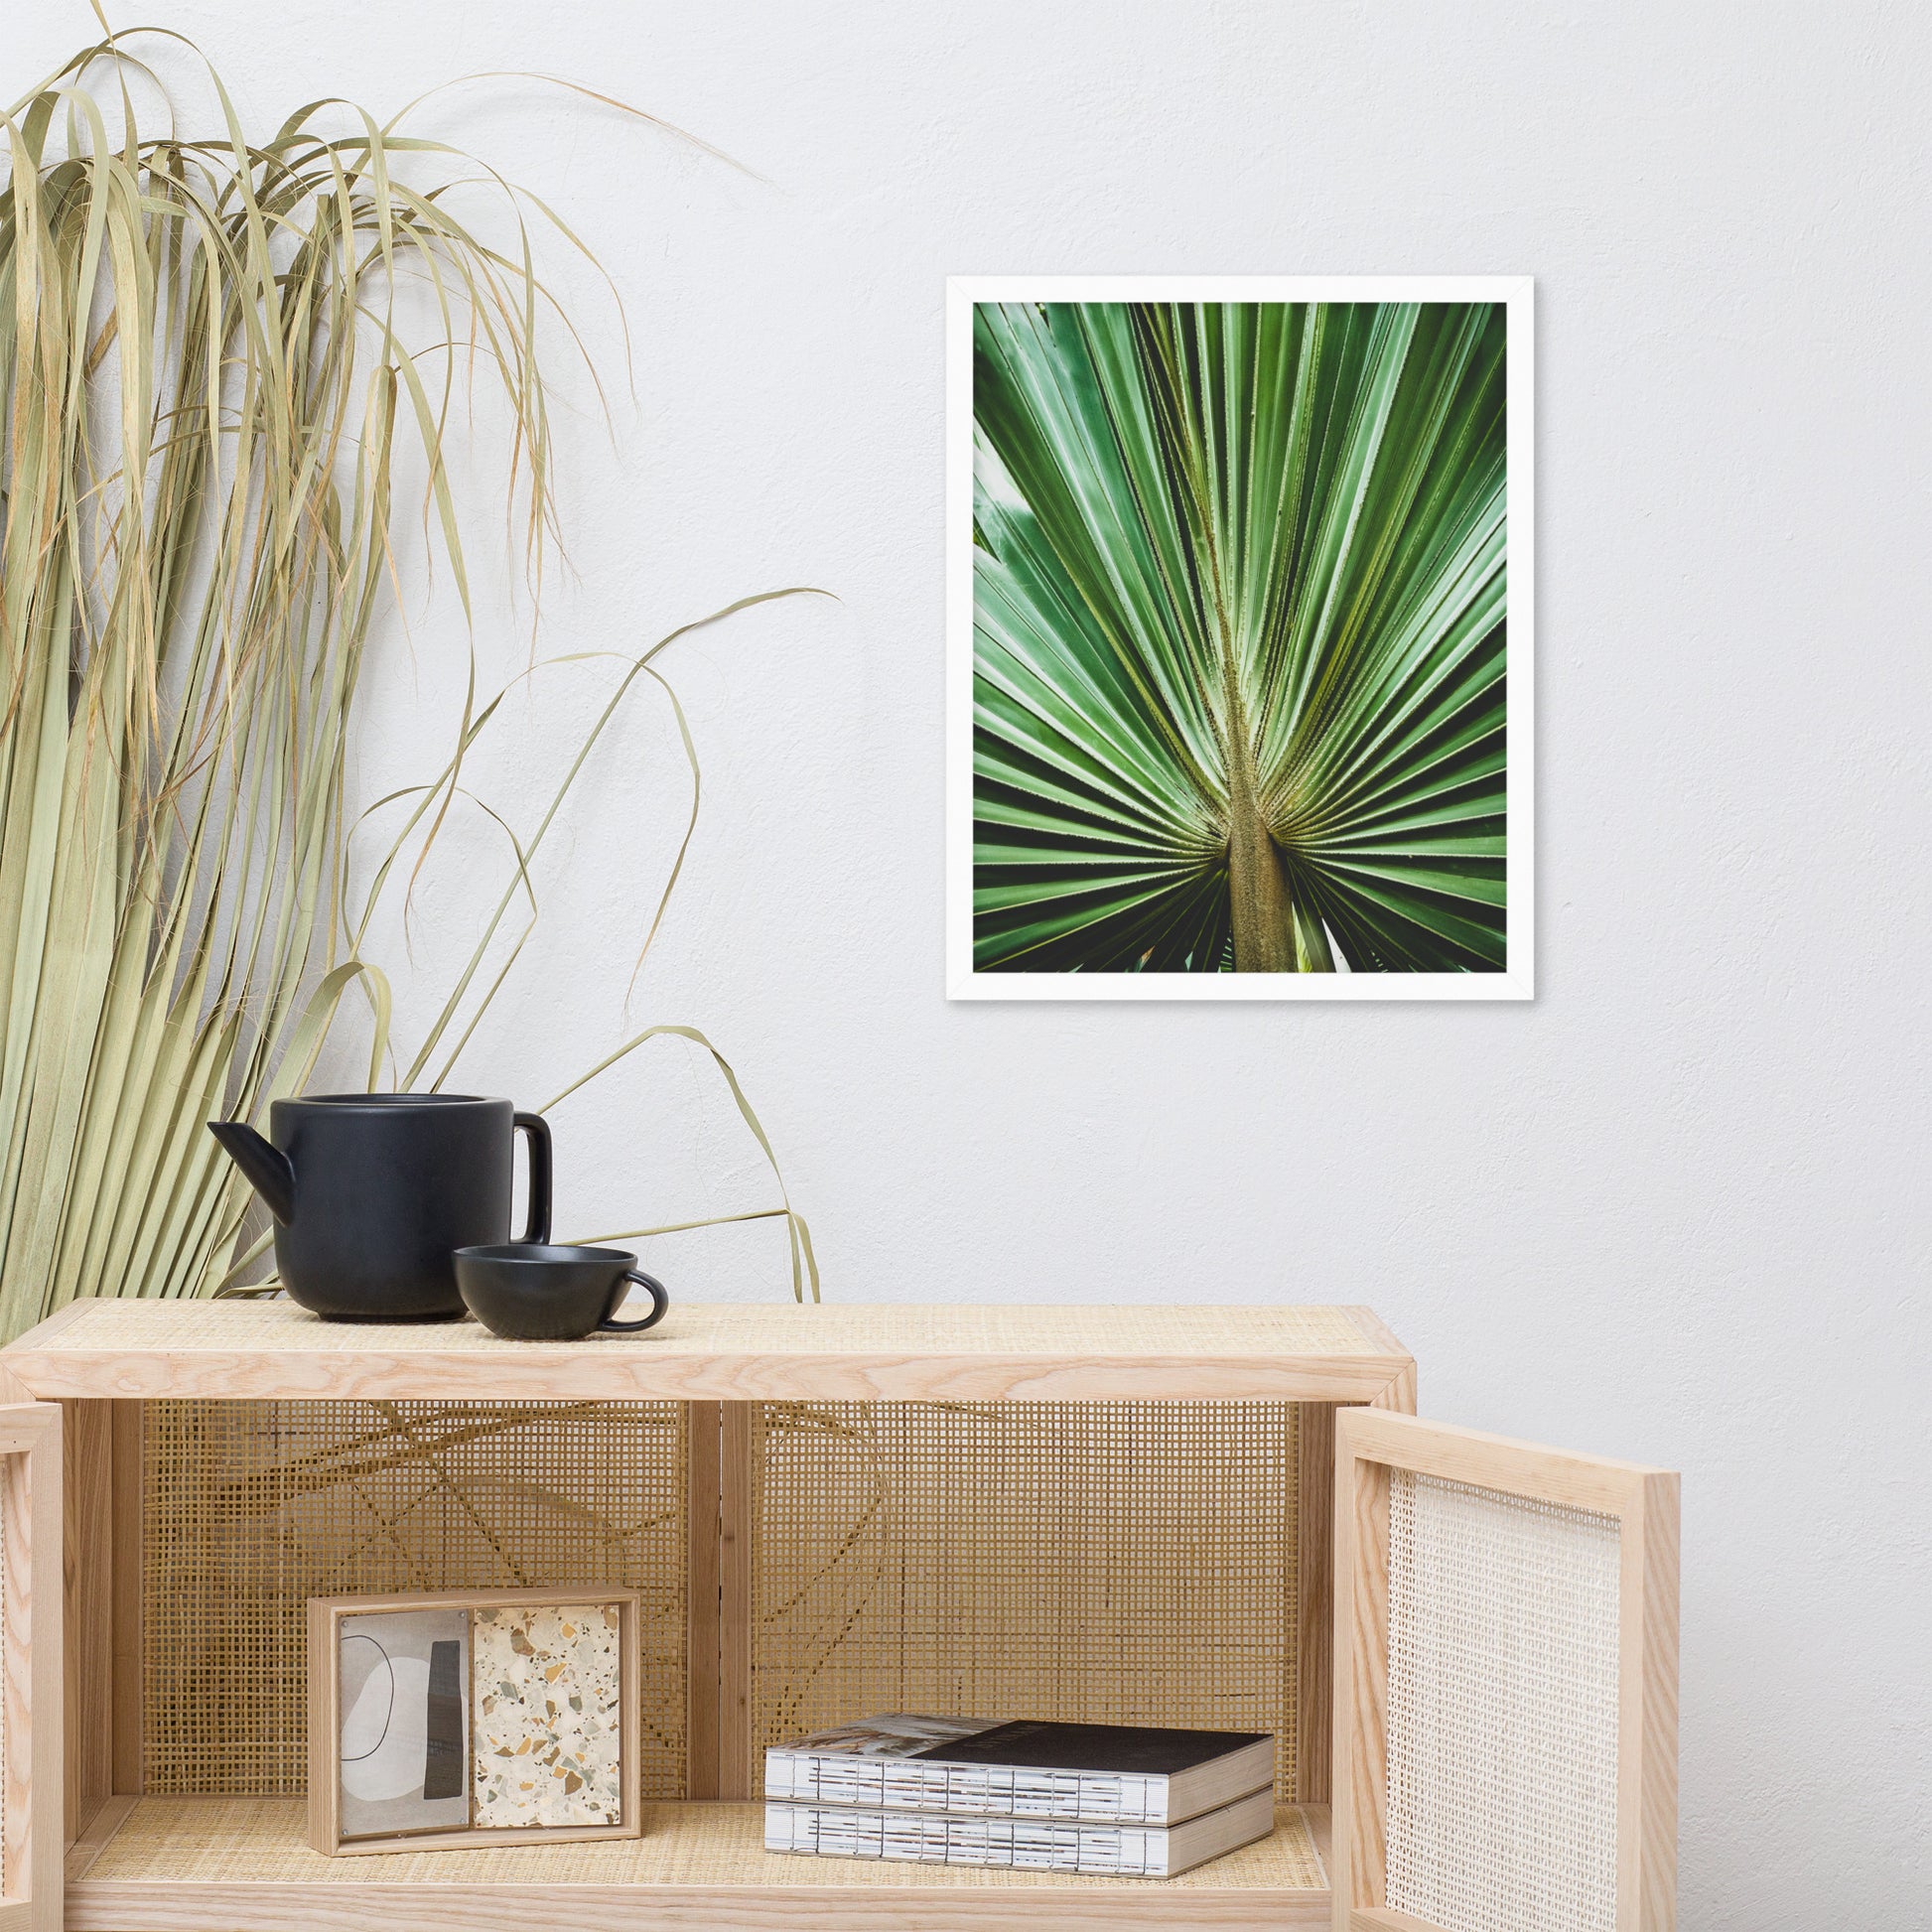 Rustic Wall Art For Dining Room: Aged and Colorized Wide Palm Leaves 2 Tropical Botanical / Nature Photo Framed Wall Art Print - Artwork - Wall Decor